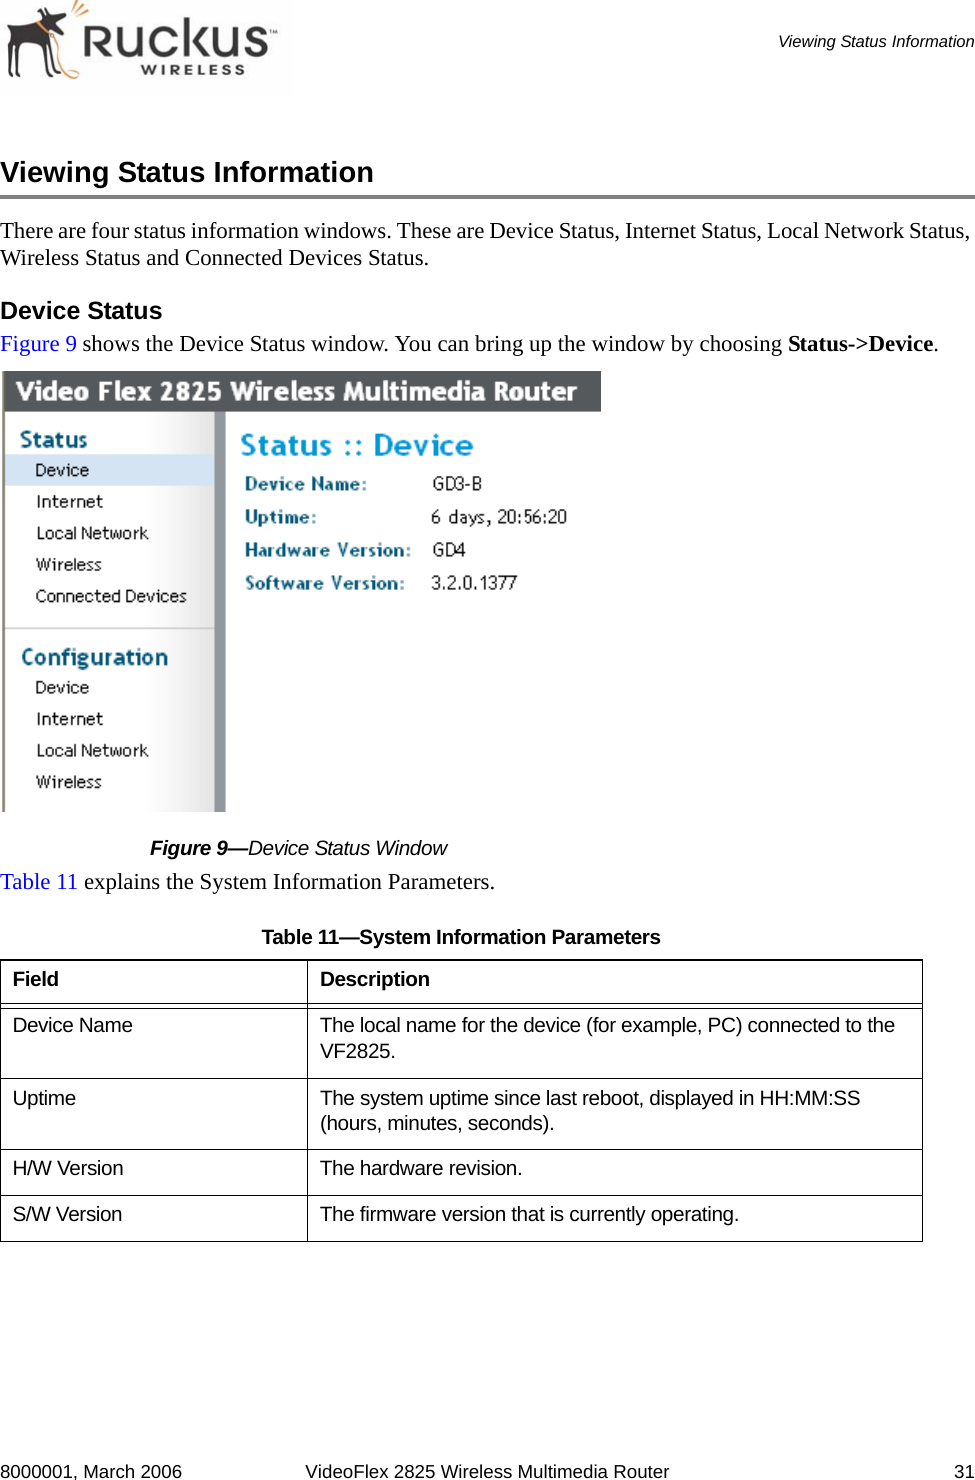 8000001, March 2006 VideoFlex 2825 Wireless Multimedia Router 31Viewing Status InformationViewing Status InformationThere are four status information windows. These are Device Status, Internet Status, Local Network Status, Wireless Status and Connected Devices Status.Device StatusFigure 9 shows the Device Status window. You can bring up the window by choosing Status-&gt;Device.Figure 9—Device Status WindowTable 11 explains the System Information Parameters.Table 11—System Information ParametersField DescriptionDevice Name The local name for the device (for example, PC) connected to the VF2825.Uptime The system uptime since last reboot, displayed in HH:MM:SS (hours, minutes, seconds).H/W Version The hardware revision.S/W Version The firmware version that is currently operating.